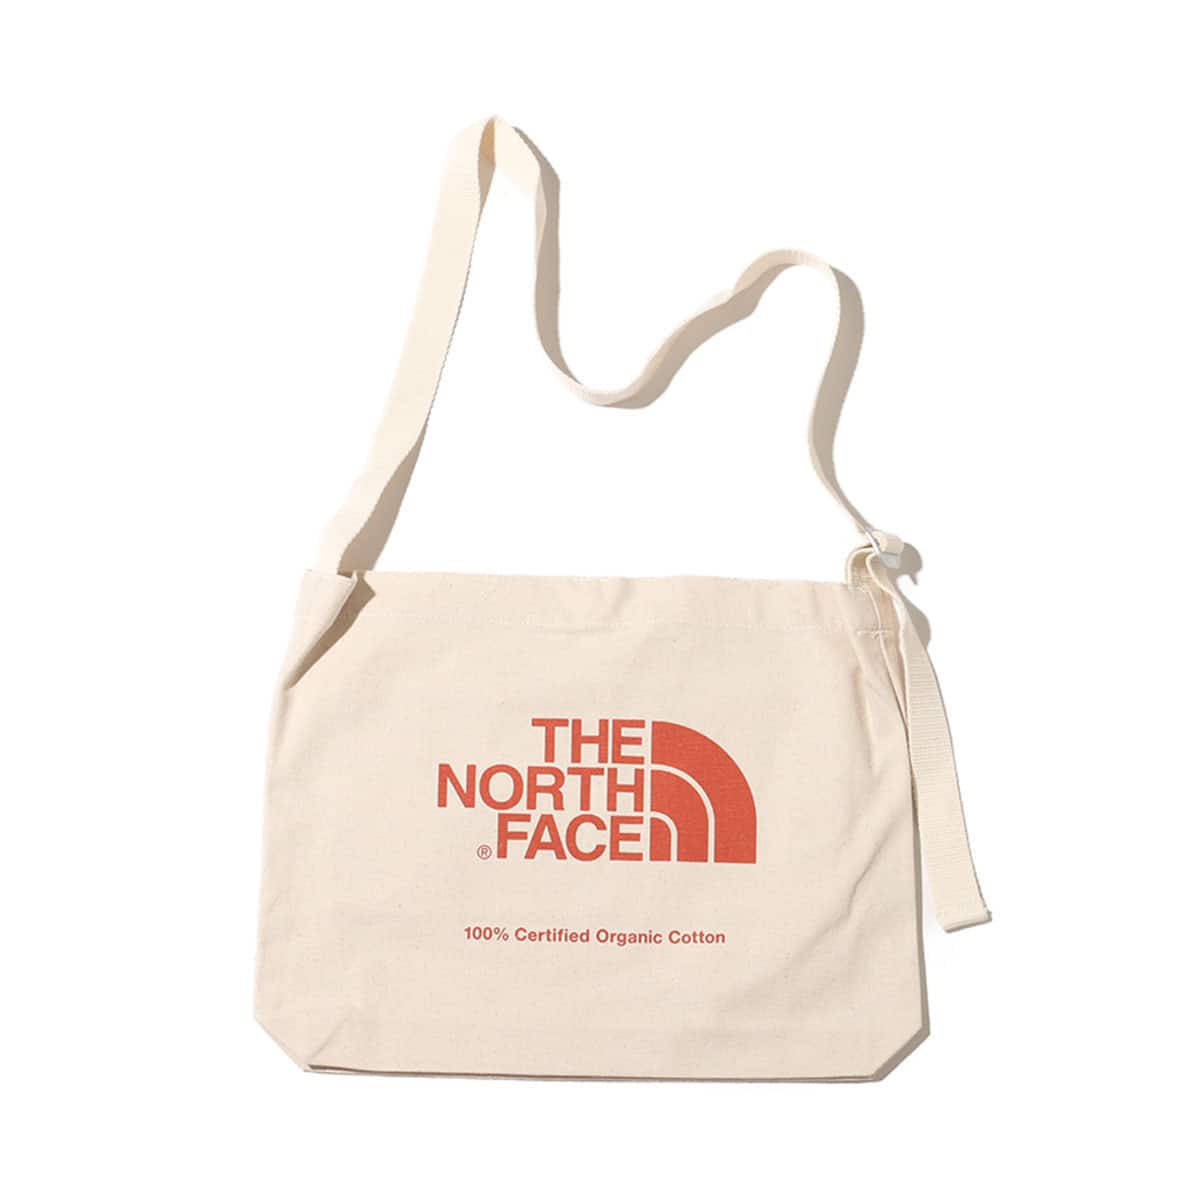 THE NORTH FACE ORGANIC COTTON MUSETTE NクレイR 23FW-I_photo_large